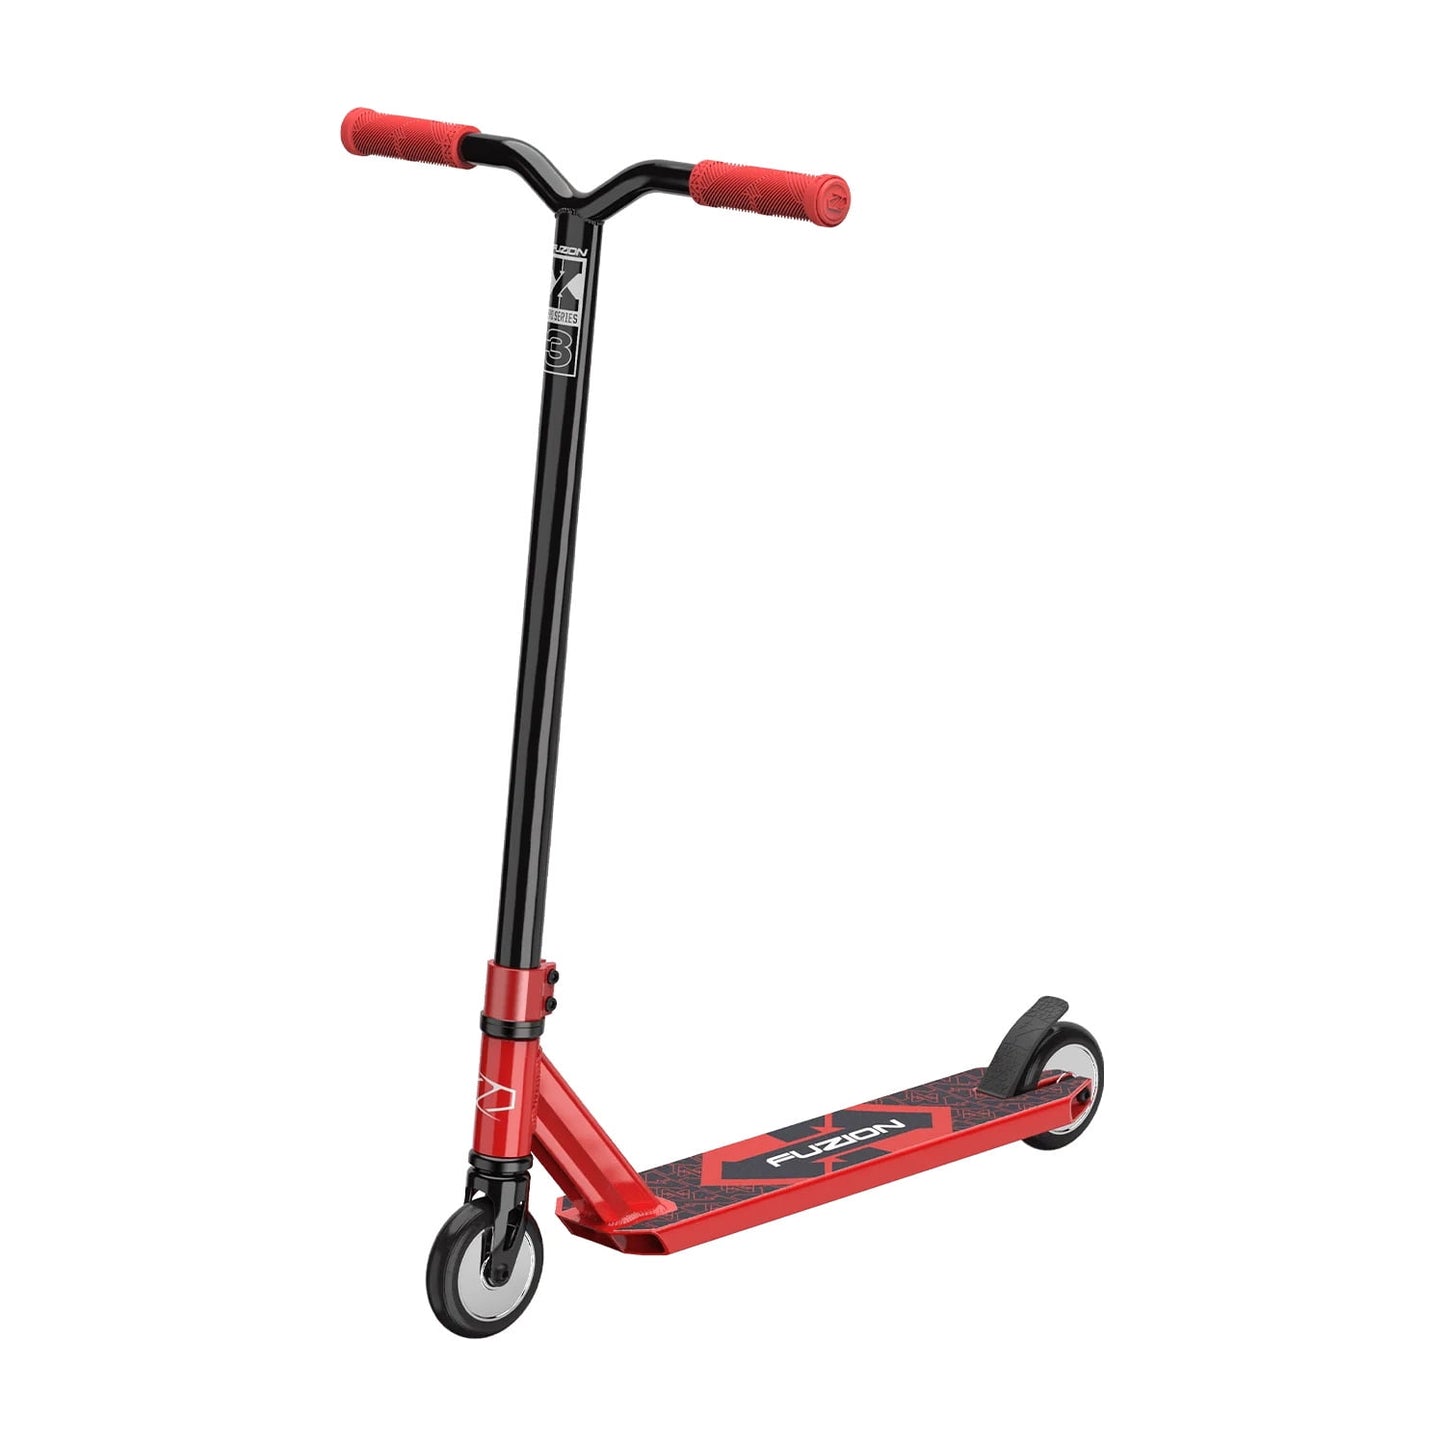 Fuzion X-3 Pro Scooters - Trick Scooter - Beginner Stunt Scooters for Kids 8 Years and Up – Quality Freestyle Kick Scooter for Boys and Girls, Red